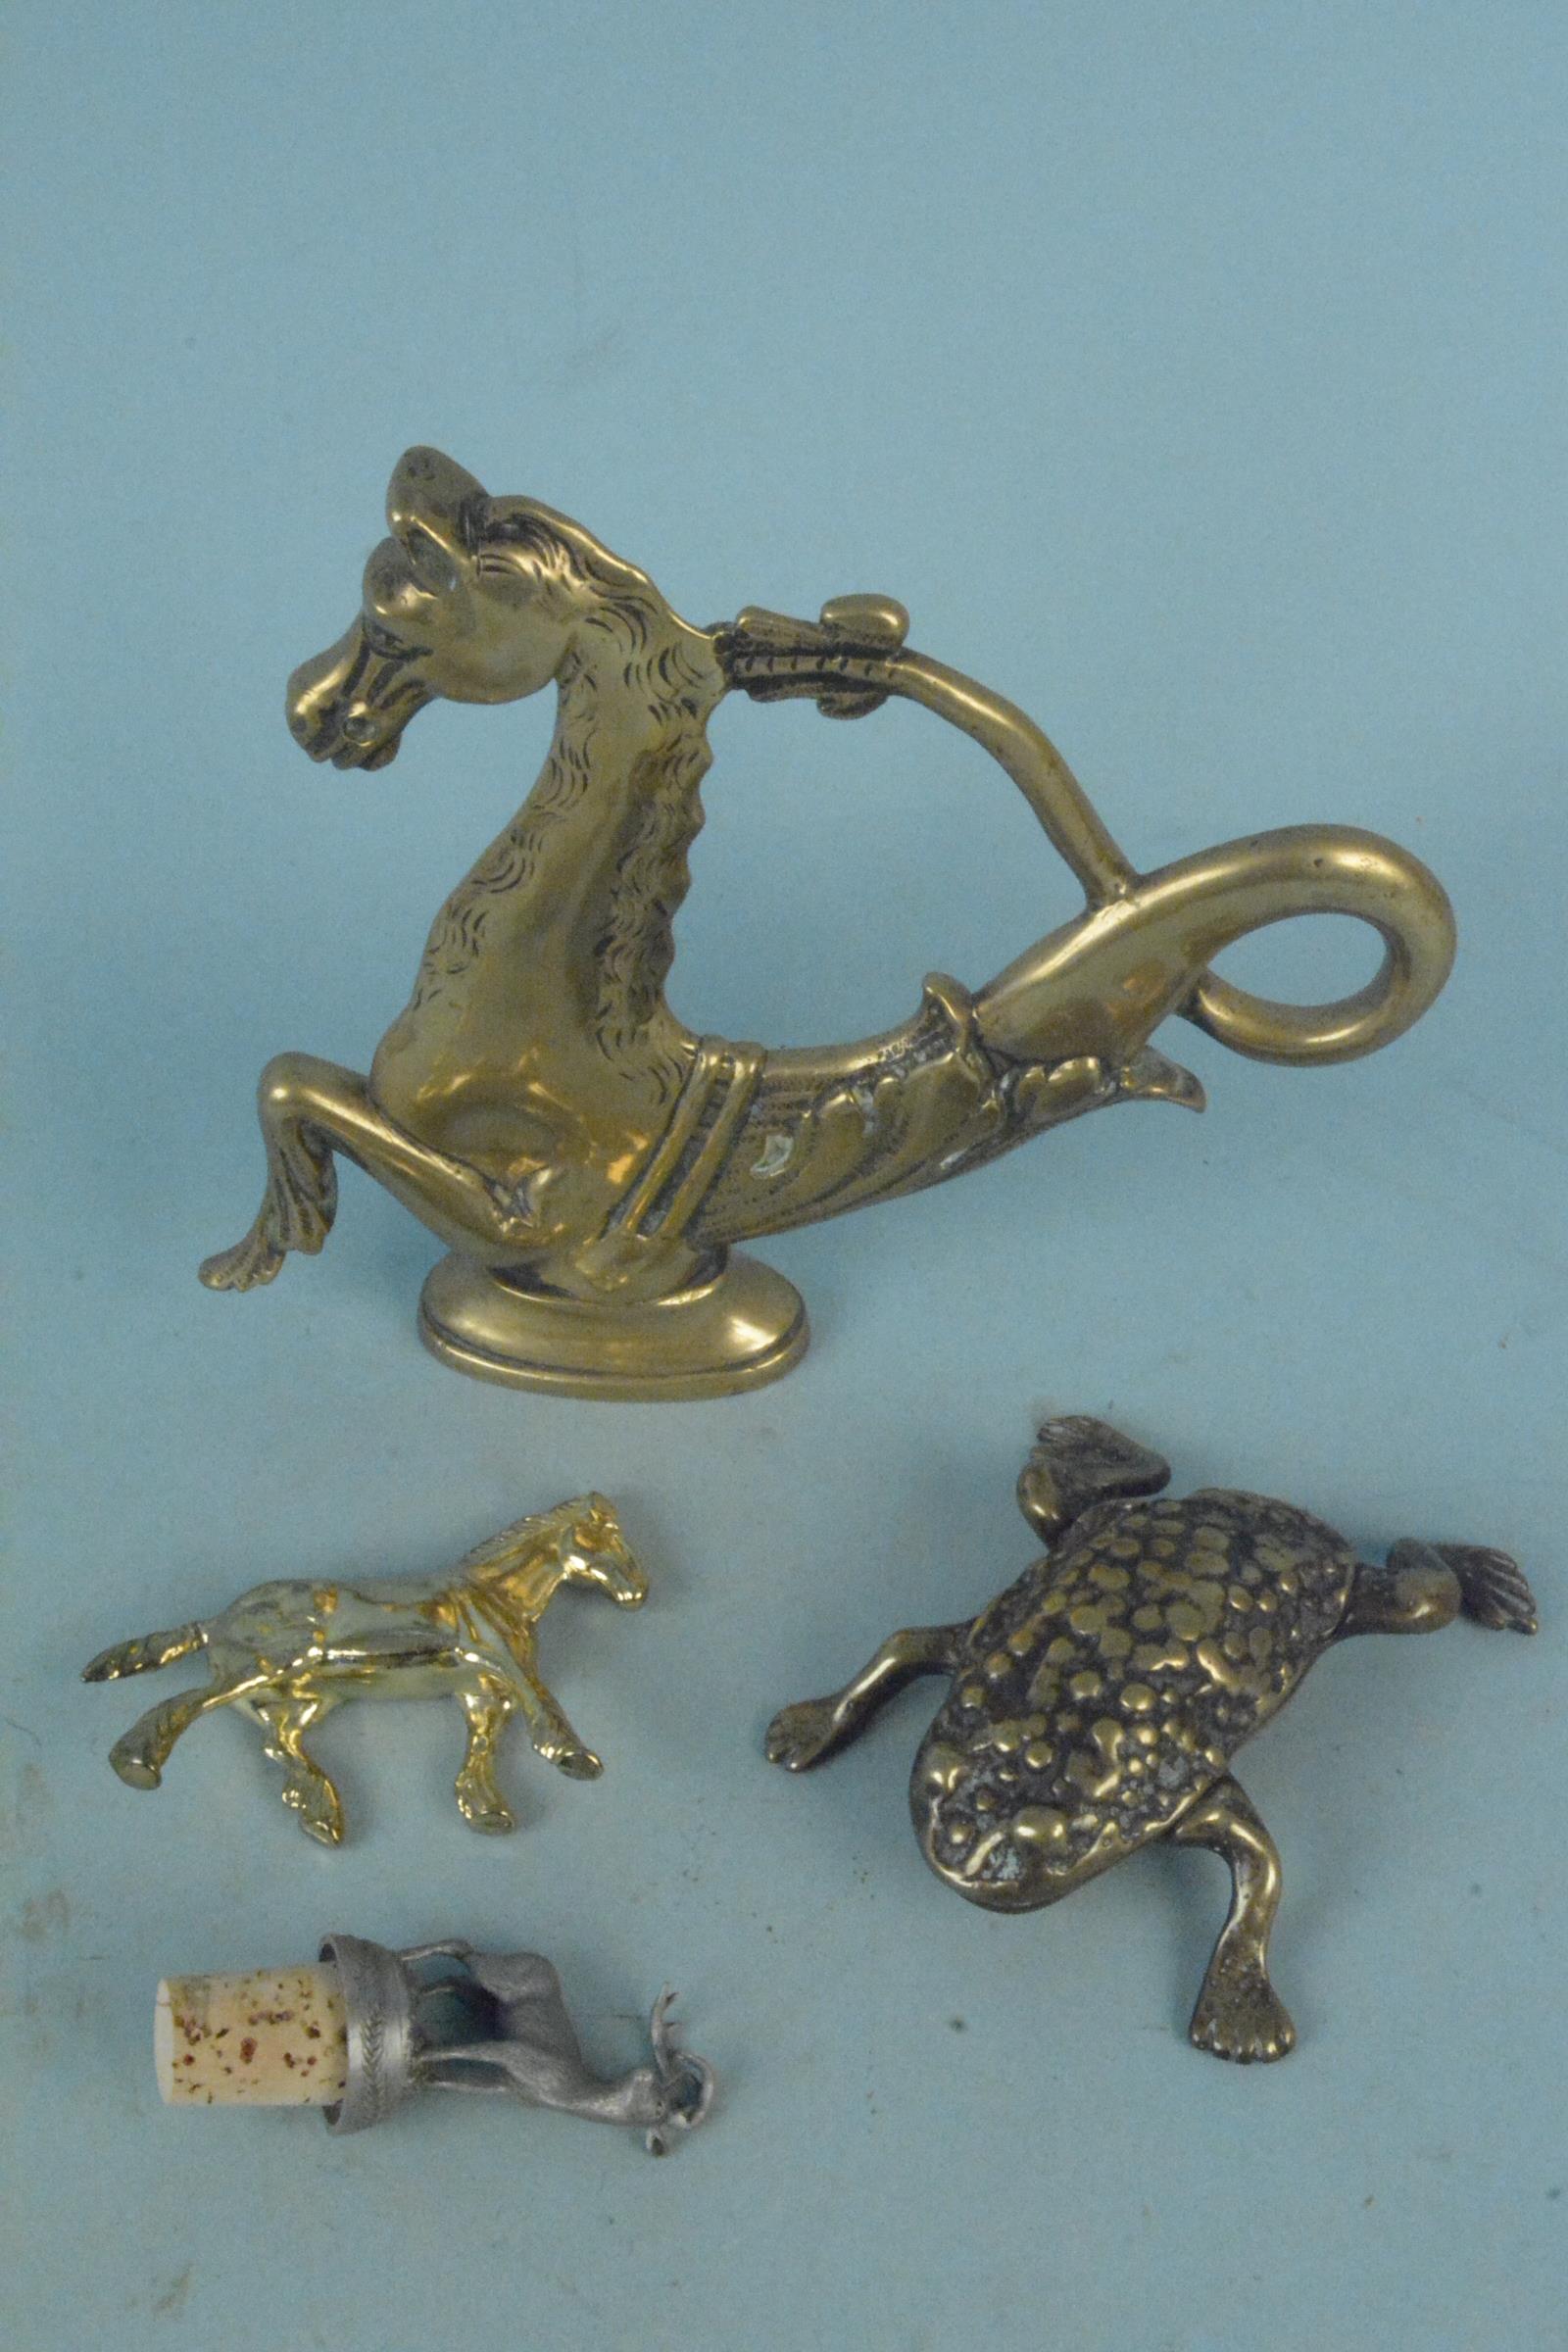 Mainly metalware with animal connections including a brass horse, - Image 2 of 3